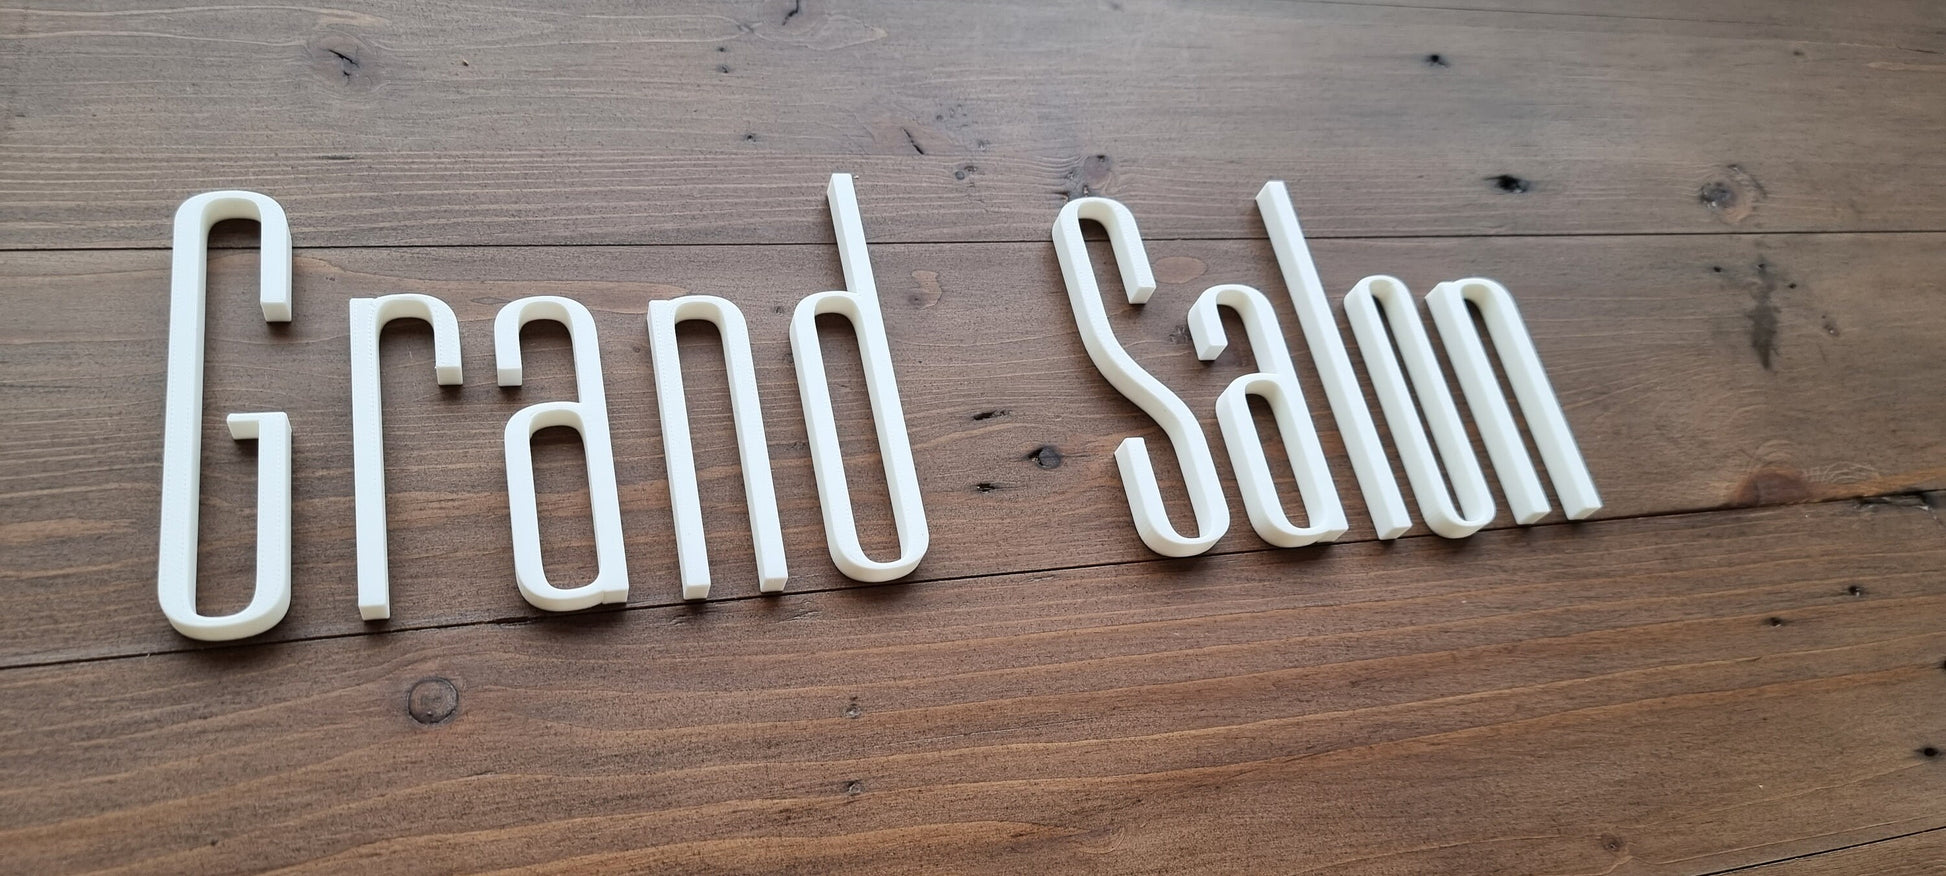 Totally Custom Business Sign Letters. Any Font, Size Or Color. Perfect For Reception Area, Lobby, Meeting Rooms & More!